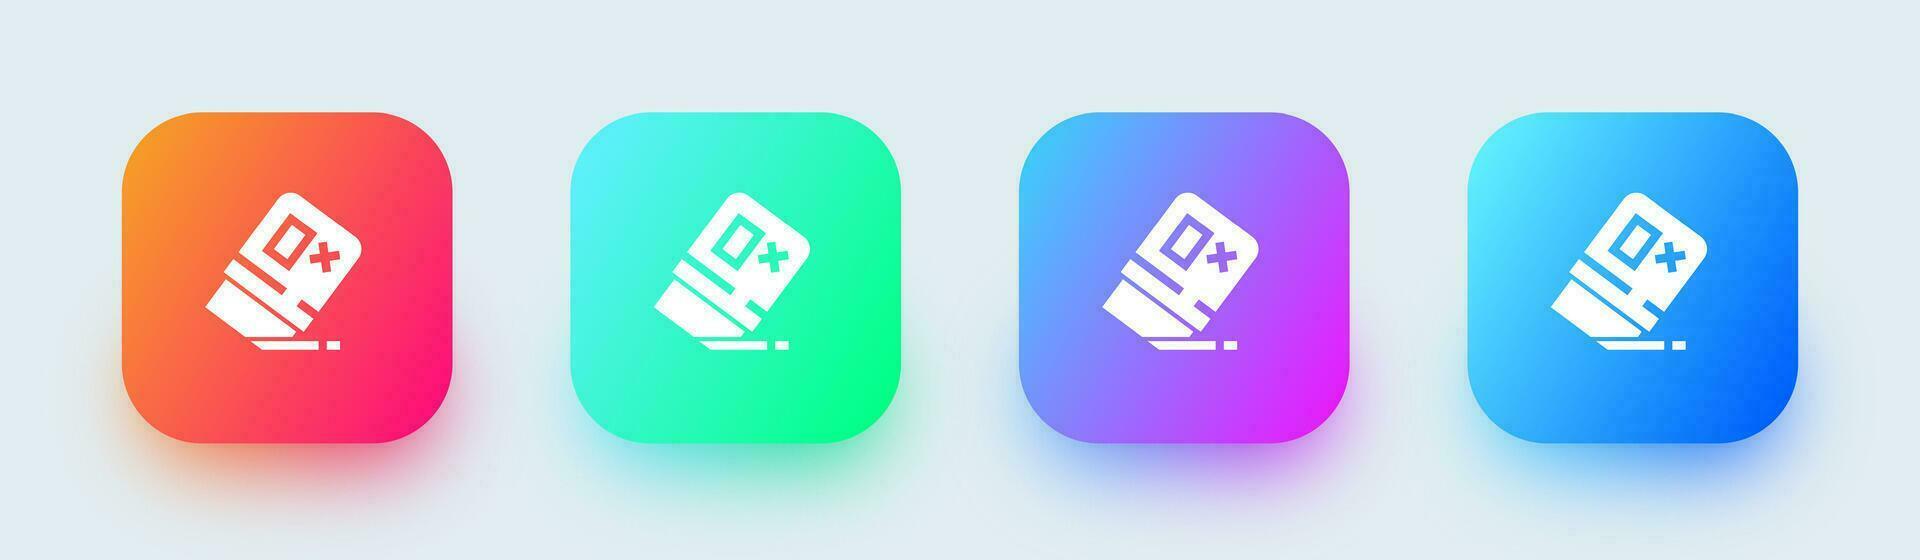 Eraser solid icon in square gradient colors. Wipe out signs vector illustration.